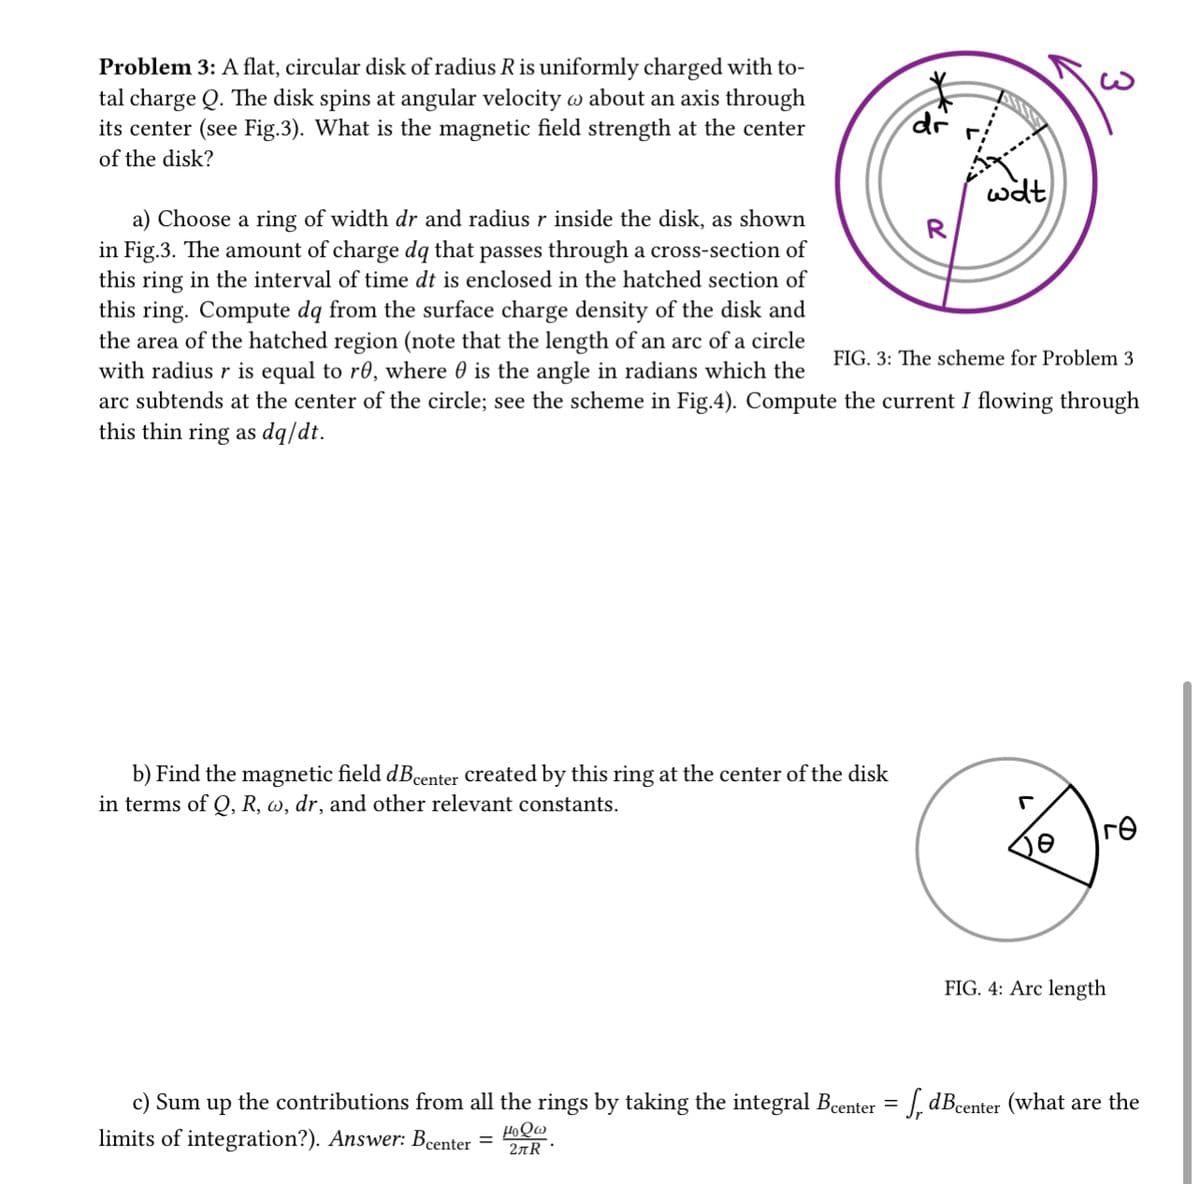 Problem 3: A flat, circular disk of radius R is uniformly charged with to-
tal charge Q. The disk spins at angular velocity @ about an axis through
its center (see Fig.3). What is the magnetic field strength at the center
of the disk?
b) Find the magnetic field dBcenter created by this ring at the center of the disk
in terms of Q, R, w, dr, and other relevant constants.
c) Sum up the contributions from all the rings by taking the integral Bcenter
limits of integration?). Answer: Bcenter
HoQw
2лR
a) Choose a ring of width dr and radius r inside the disk, as shown
in Fig.3. The amount of charge dq that passes through a cross-section of
this ring in the interval of time dt is enclosed in the hatched section of
this ring. Compute dq from the surface charge density of the disk and
the area of the hatched region (note that the length of an arc of a circle
with radius r is equal to re, where is the angle in radians which the
arc subtends at the center of the circle; see the scheme in Fig.4). Compute the current I flowing through
this thin ring as dq/dt.
FIG. 3: The scheme for Problem 3
=
dr
=
wat
R
3
|гө
FIG. 4: Arc length
dBcenter (what are the